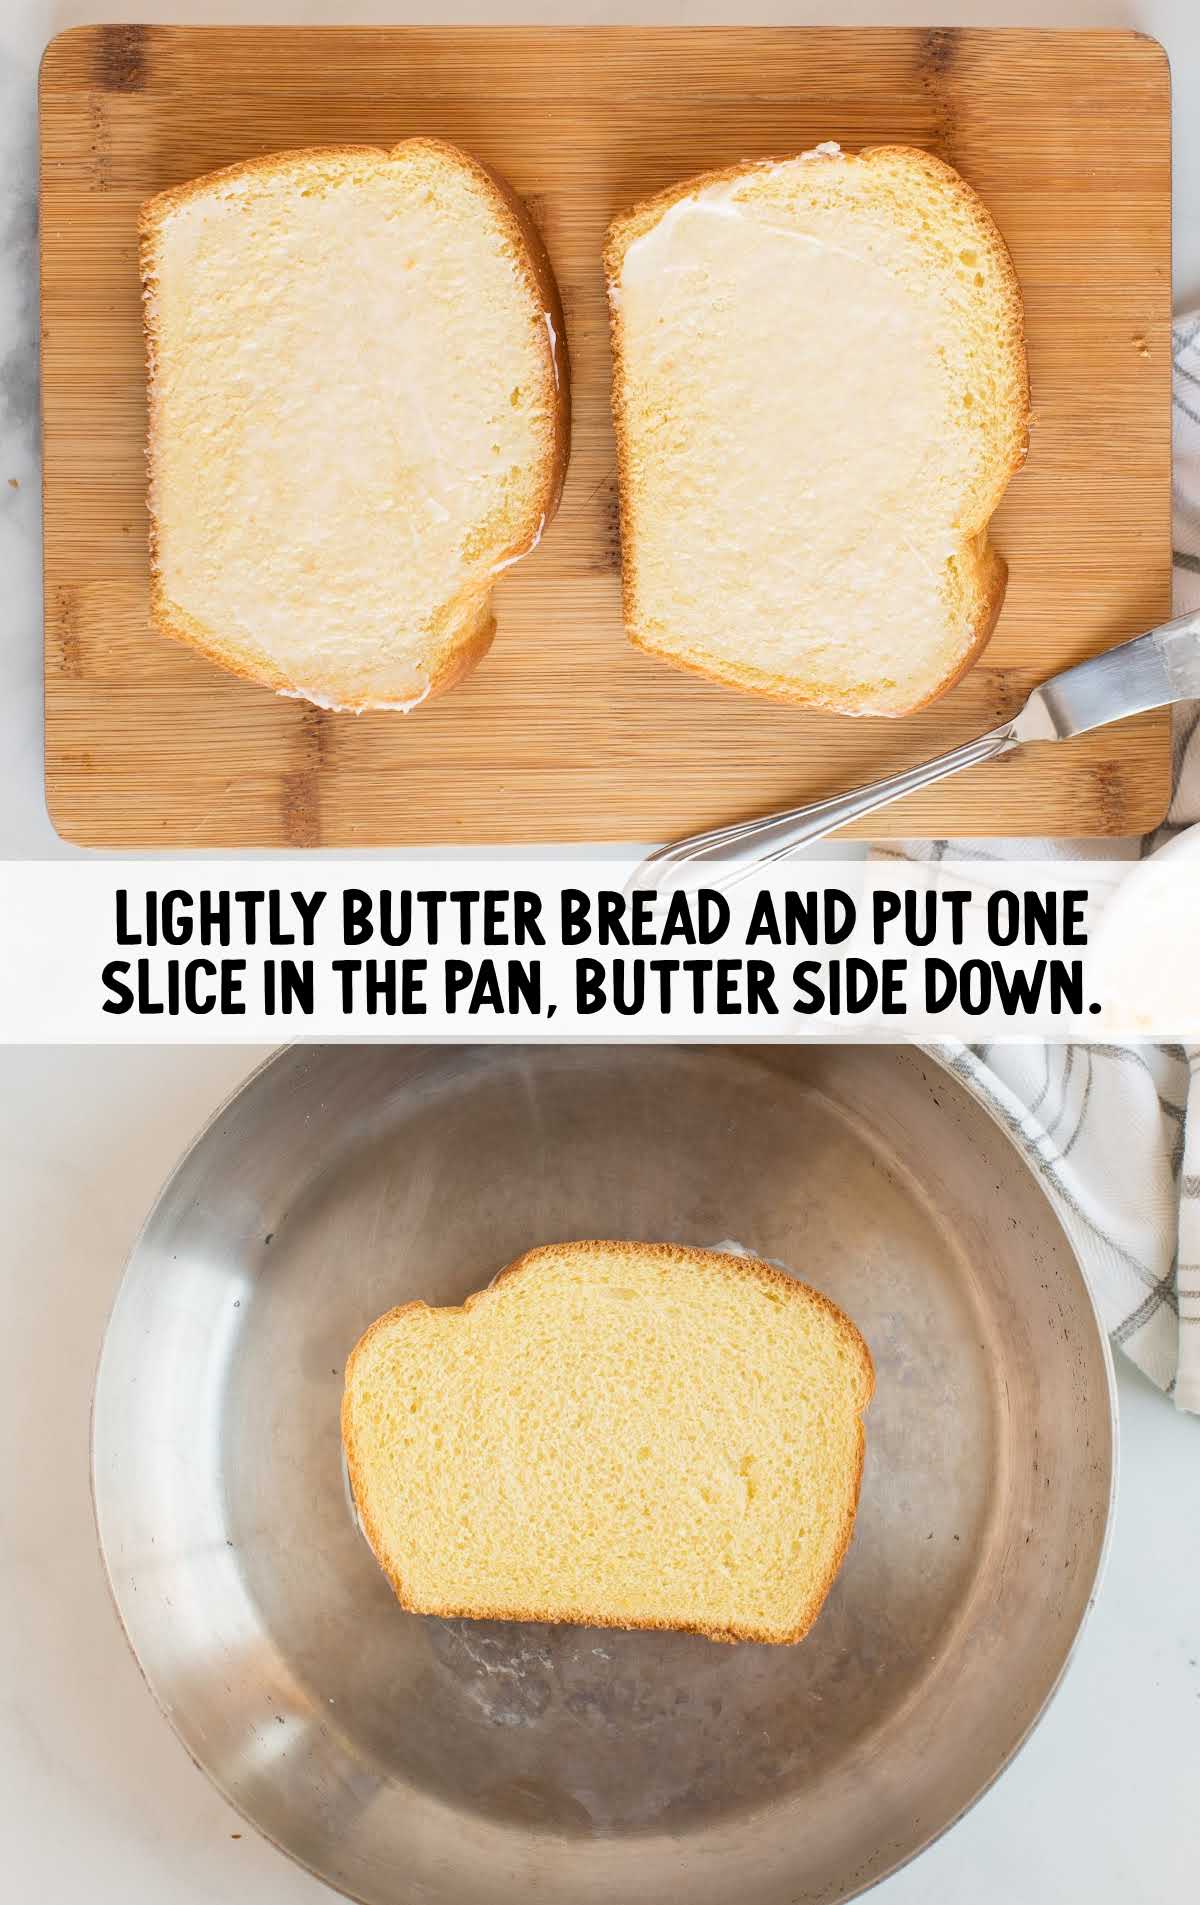 butter being spread on the bread and then bread placed on a skillet